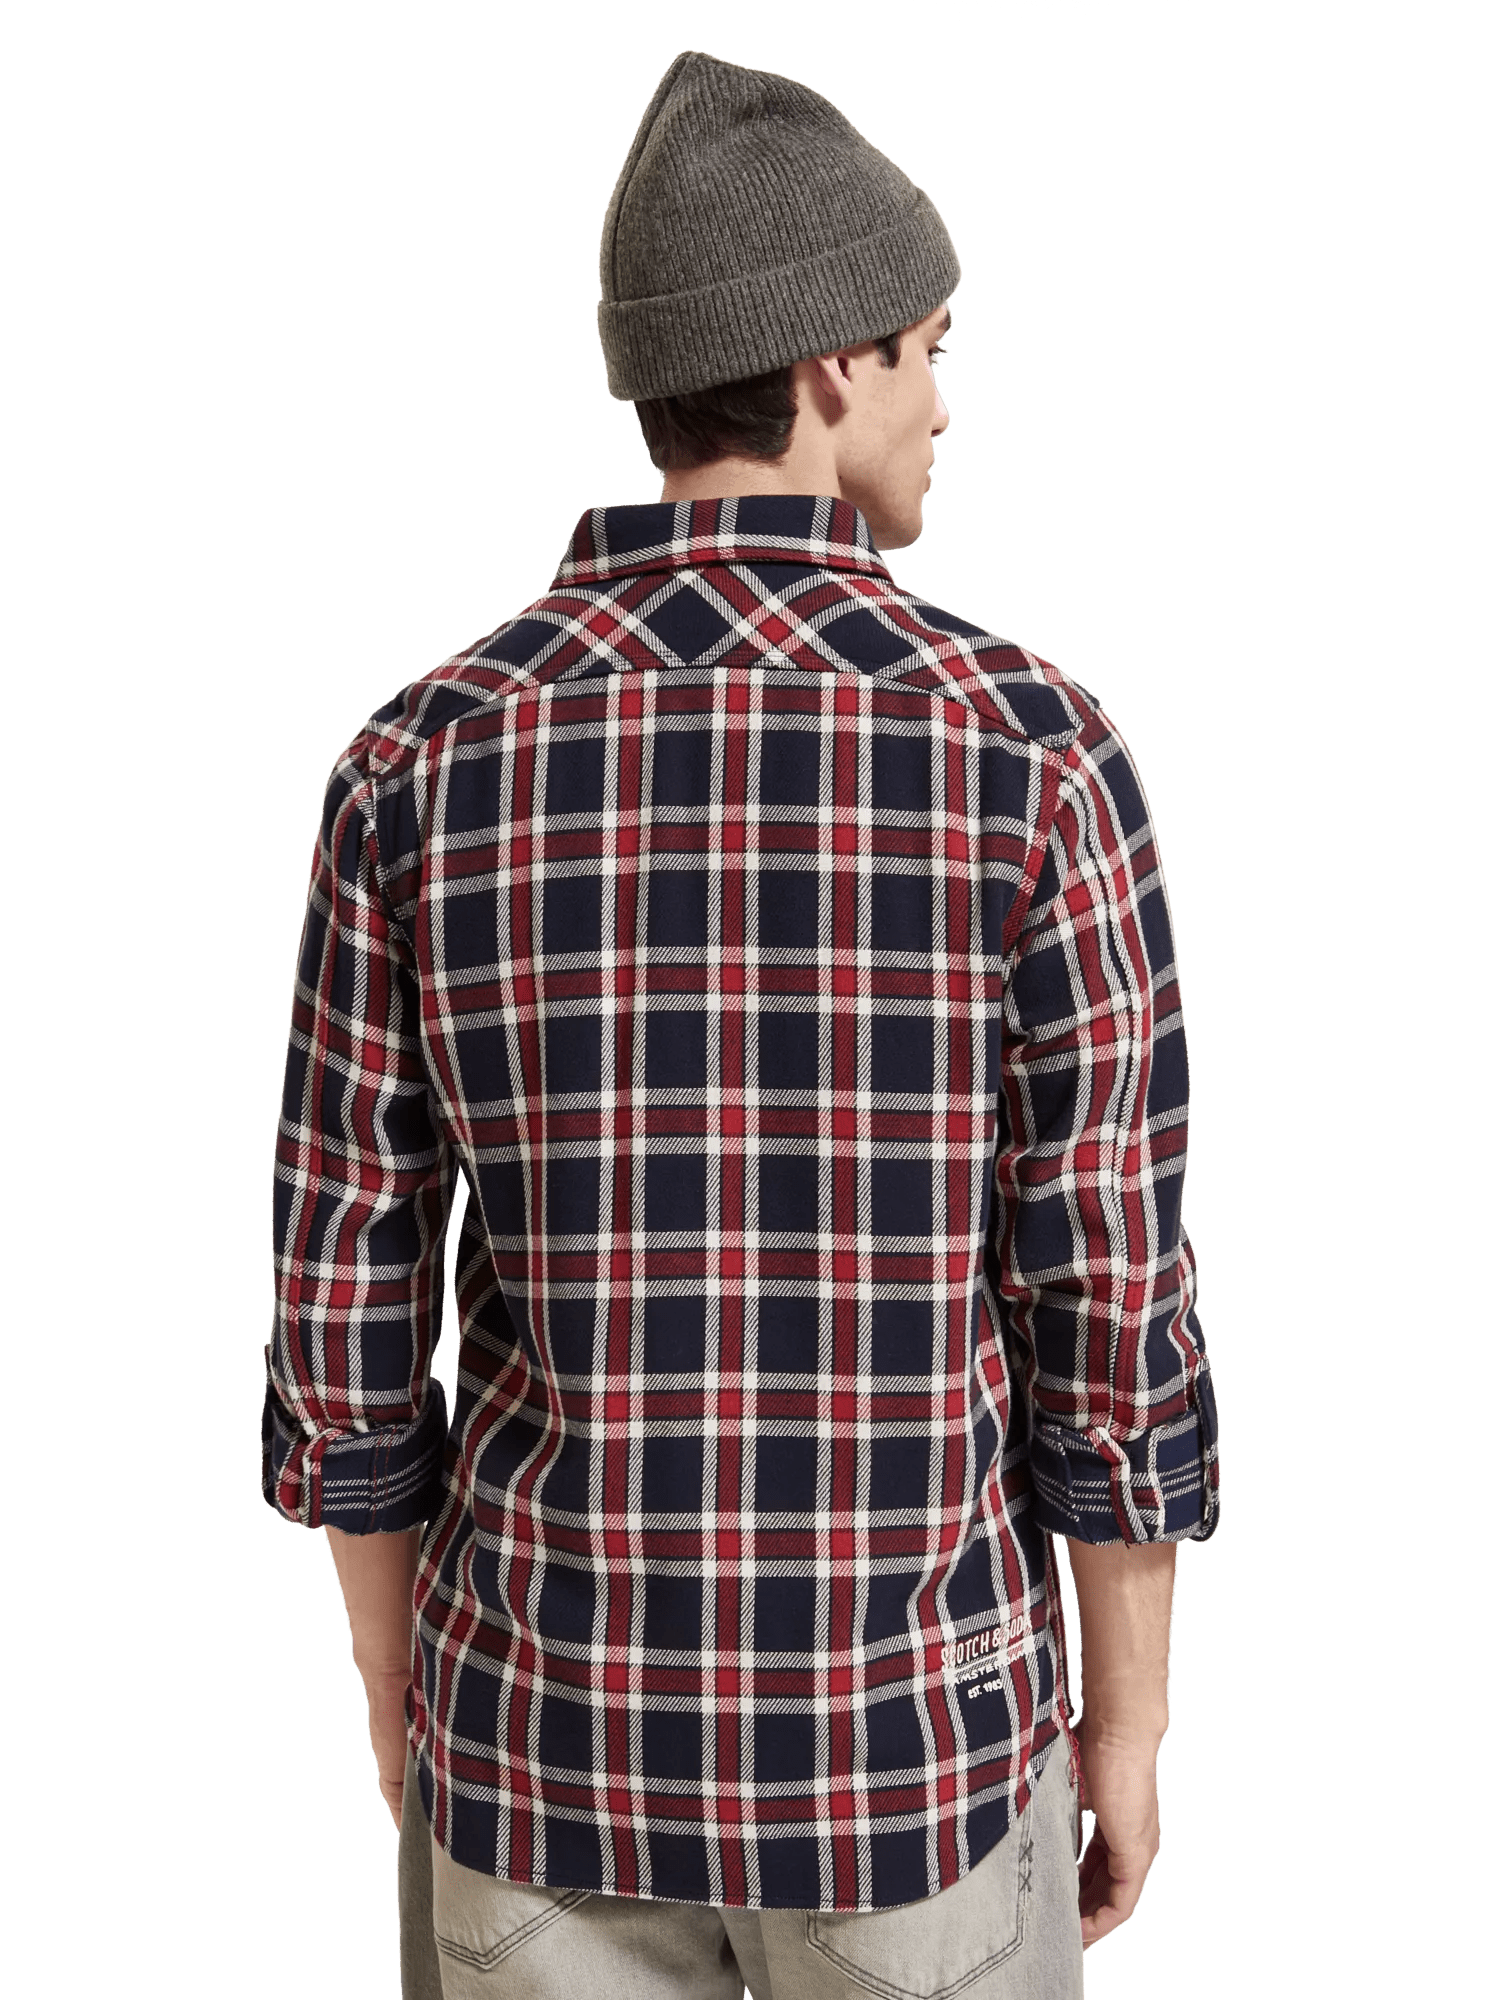 Scotch & Soda - Double-Face Twill Check Shirt - Red Blue Check